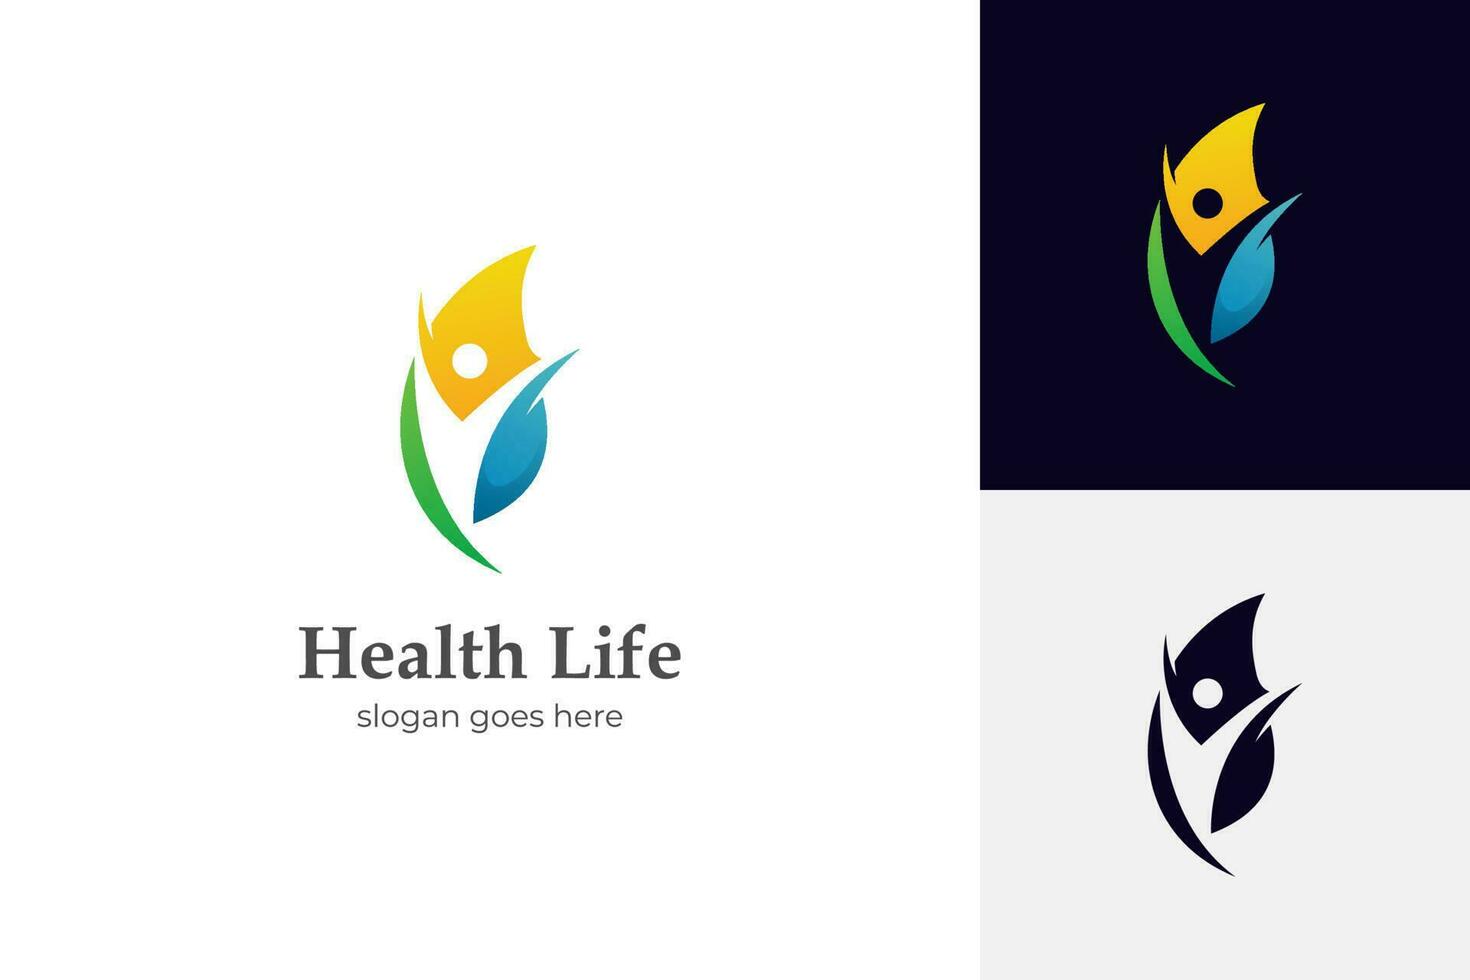 healthy life, people leaf logo icon design, for medical, health and physiotherapy, Chiropractic and wellness center logo element, Ecological and biological product concept sign vector